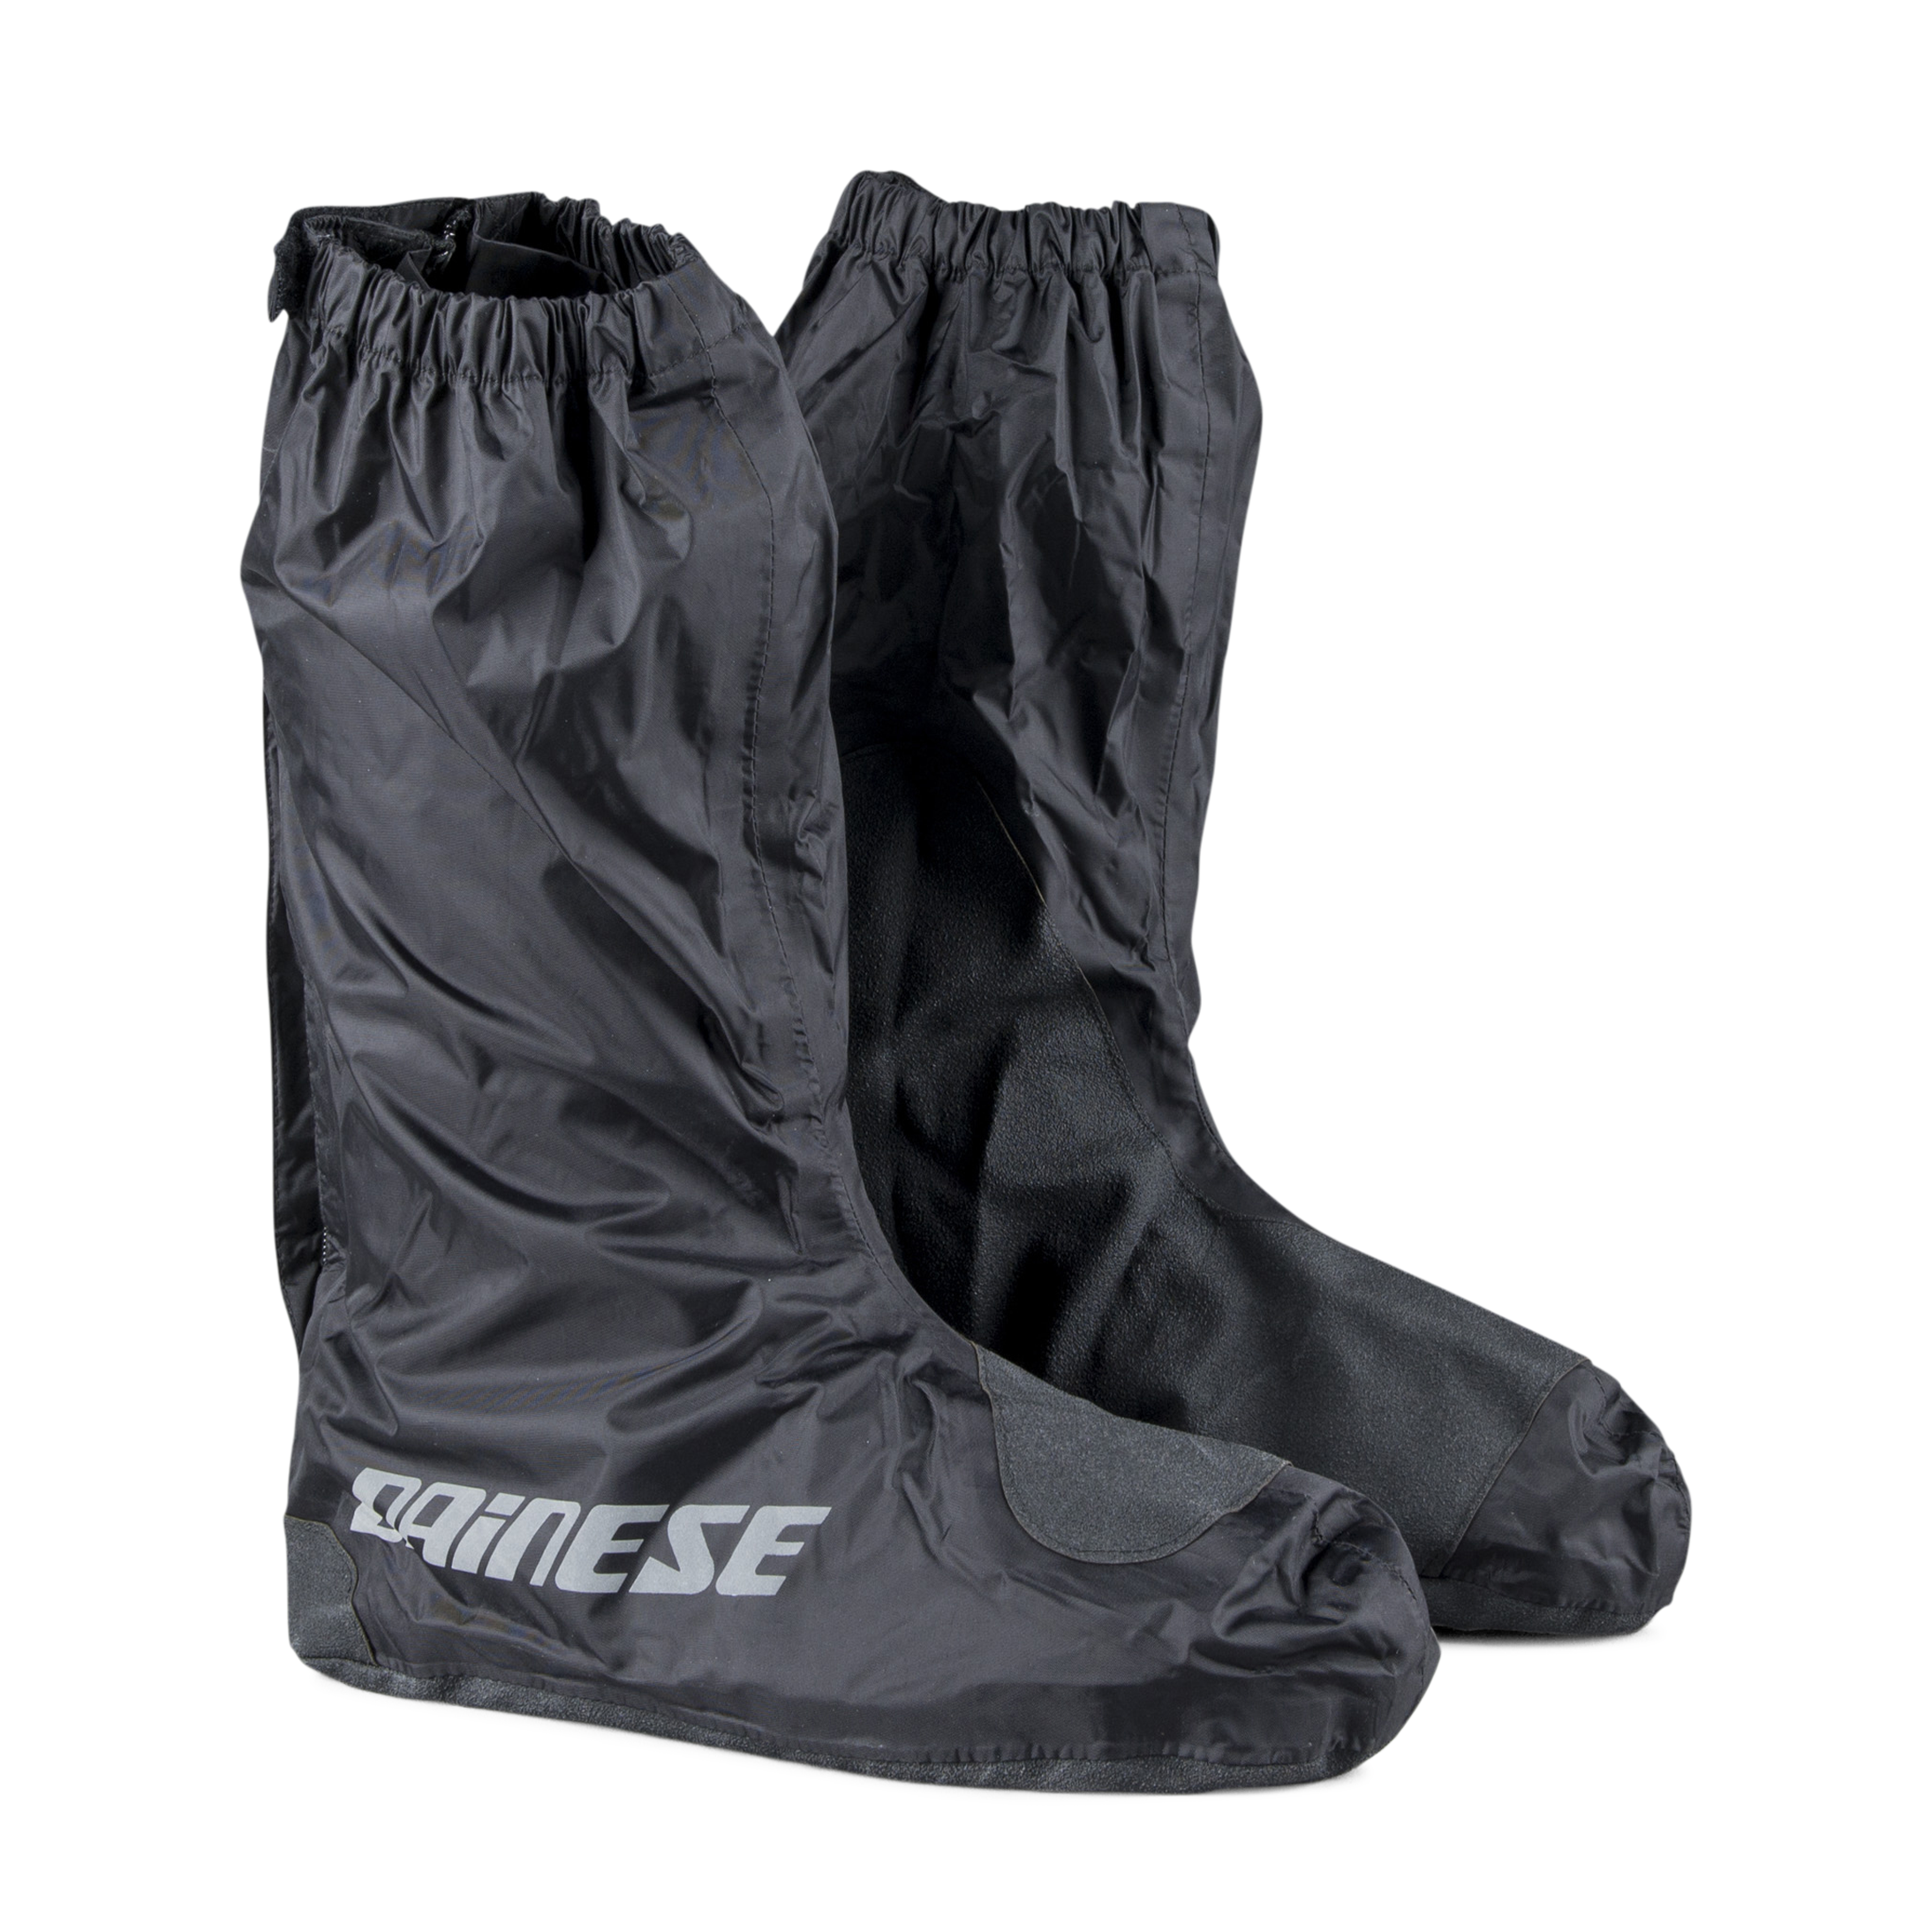 Dainese Rain Overboots - Get 50% off 